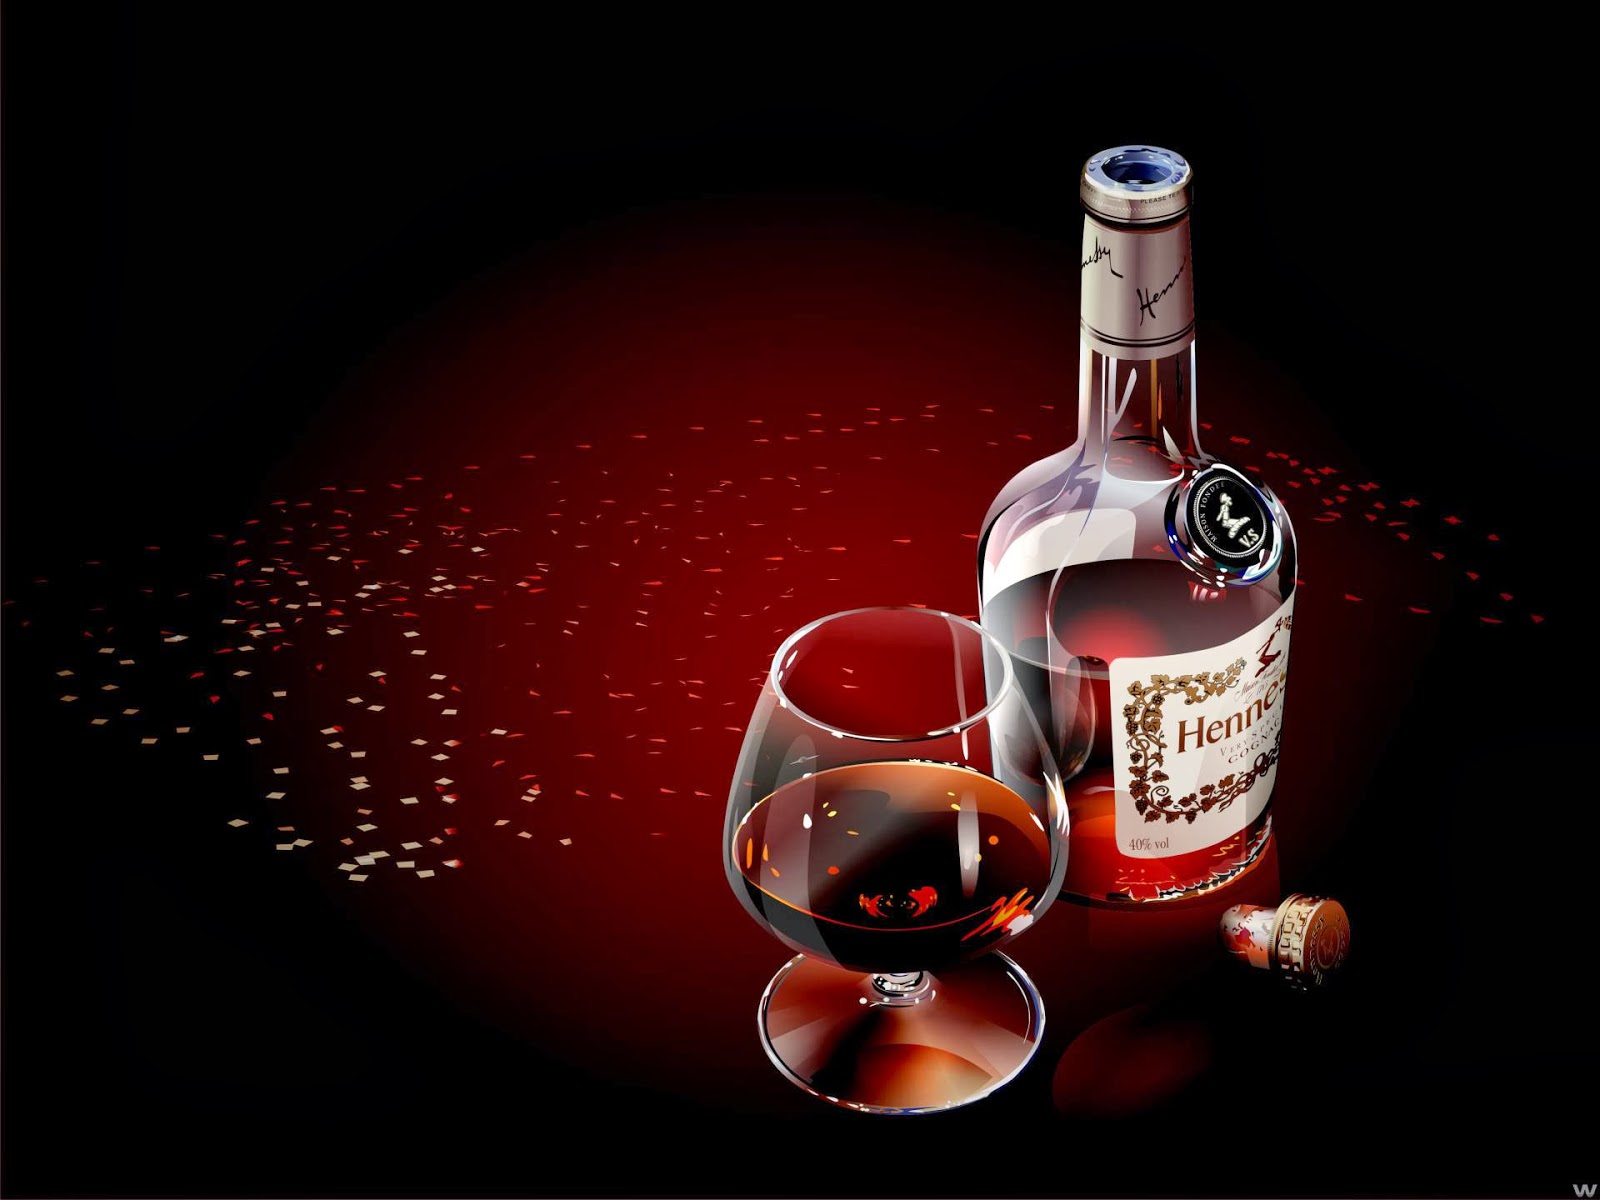 Secrets Of Happiness Wine Bottle And Cigar Wallpapers HD Wallpapers Download Free Map Images Wallpaper [wallpaper376.blogspot.com]